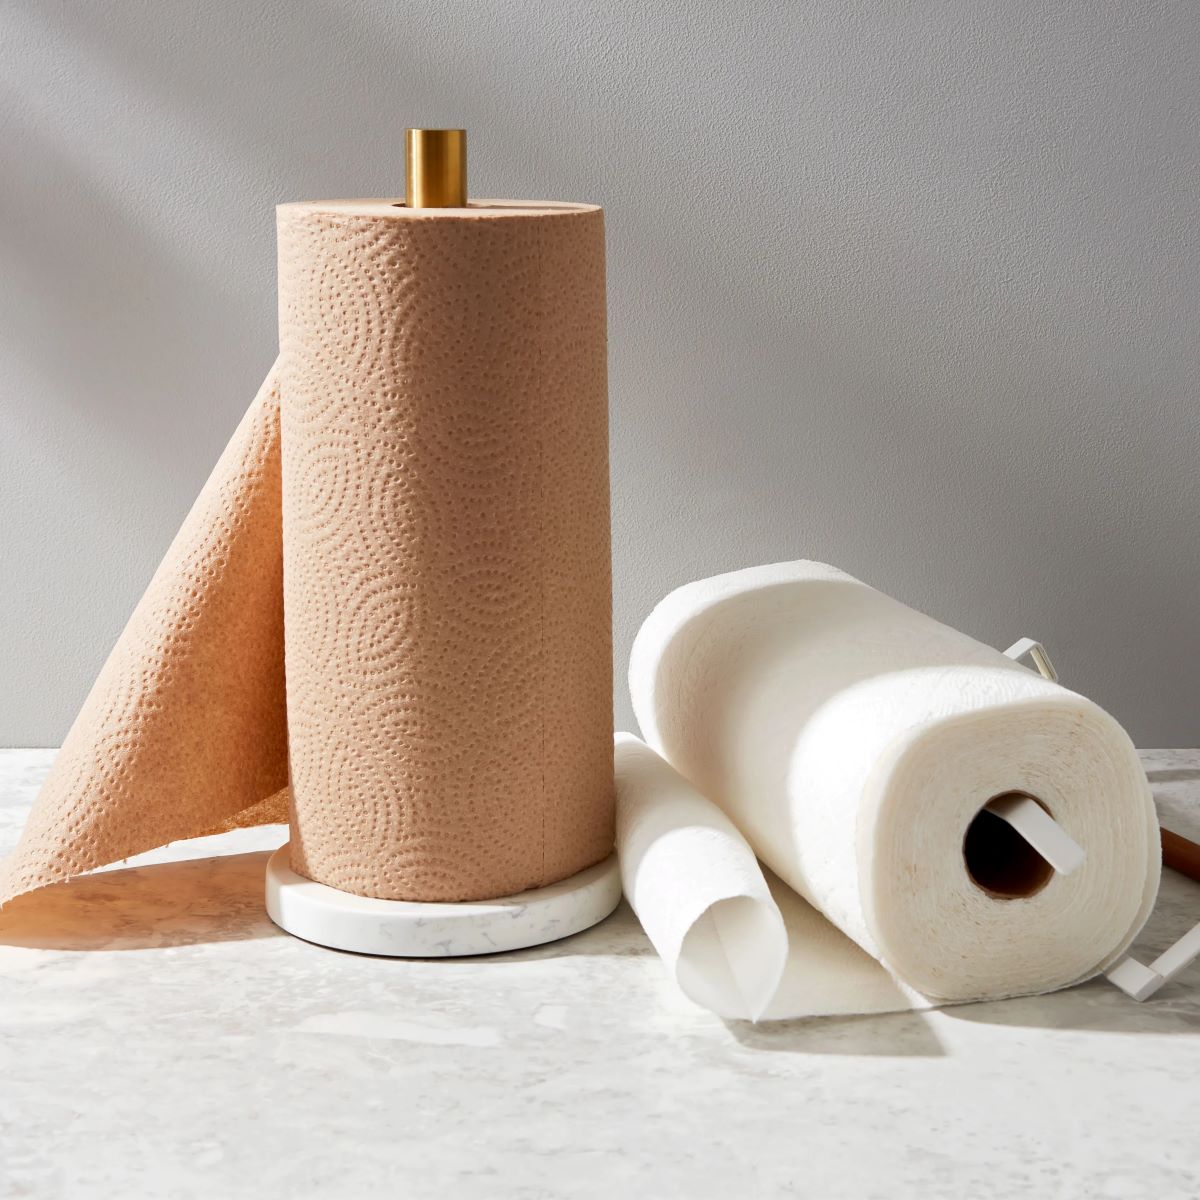 How To Store Paper Towels